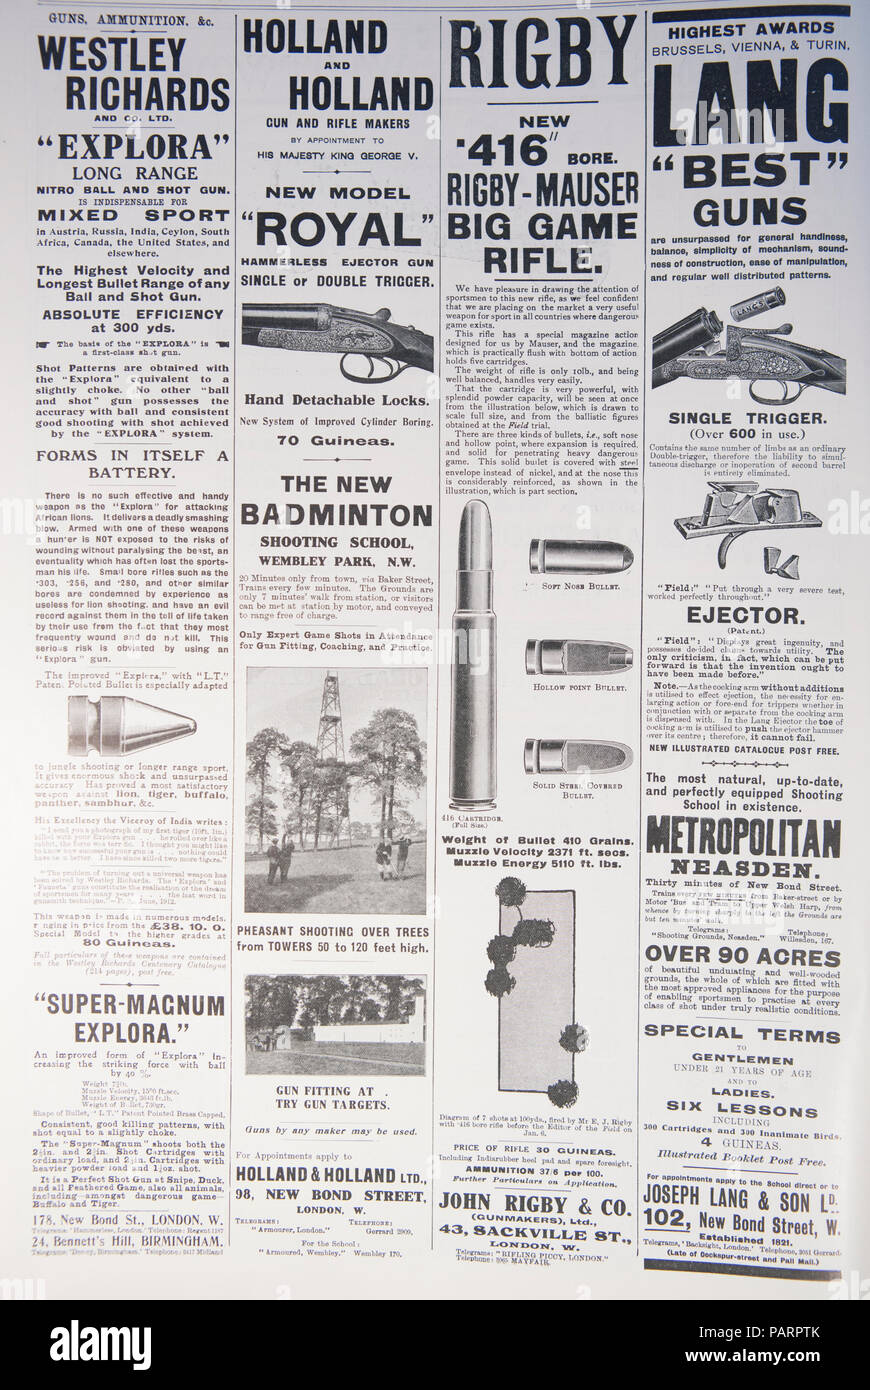 Adverts for British Guns. From an old magazine during the 1914-1918 period. UK GB Stock Photo